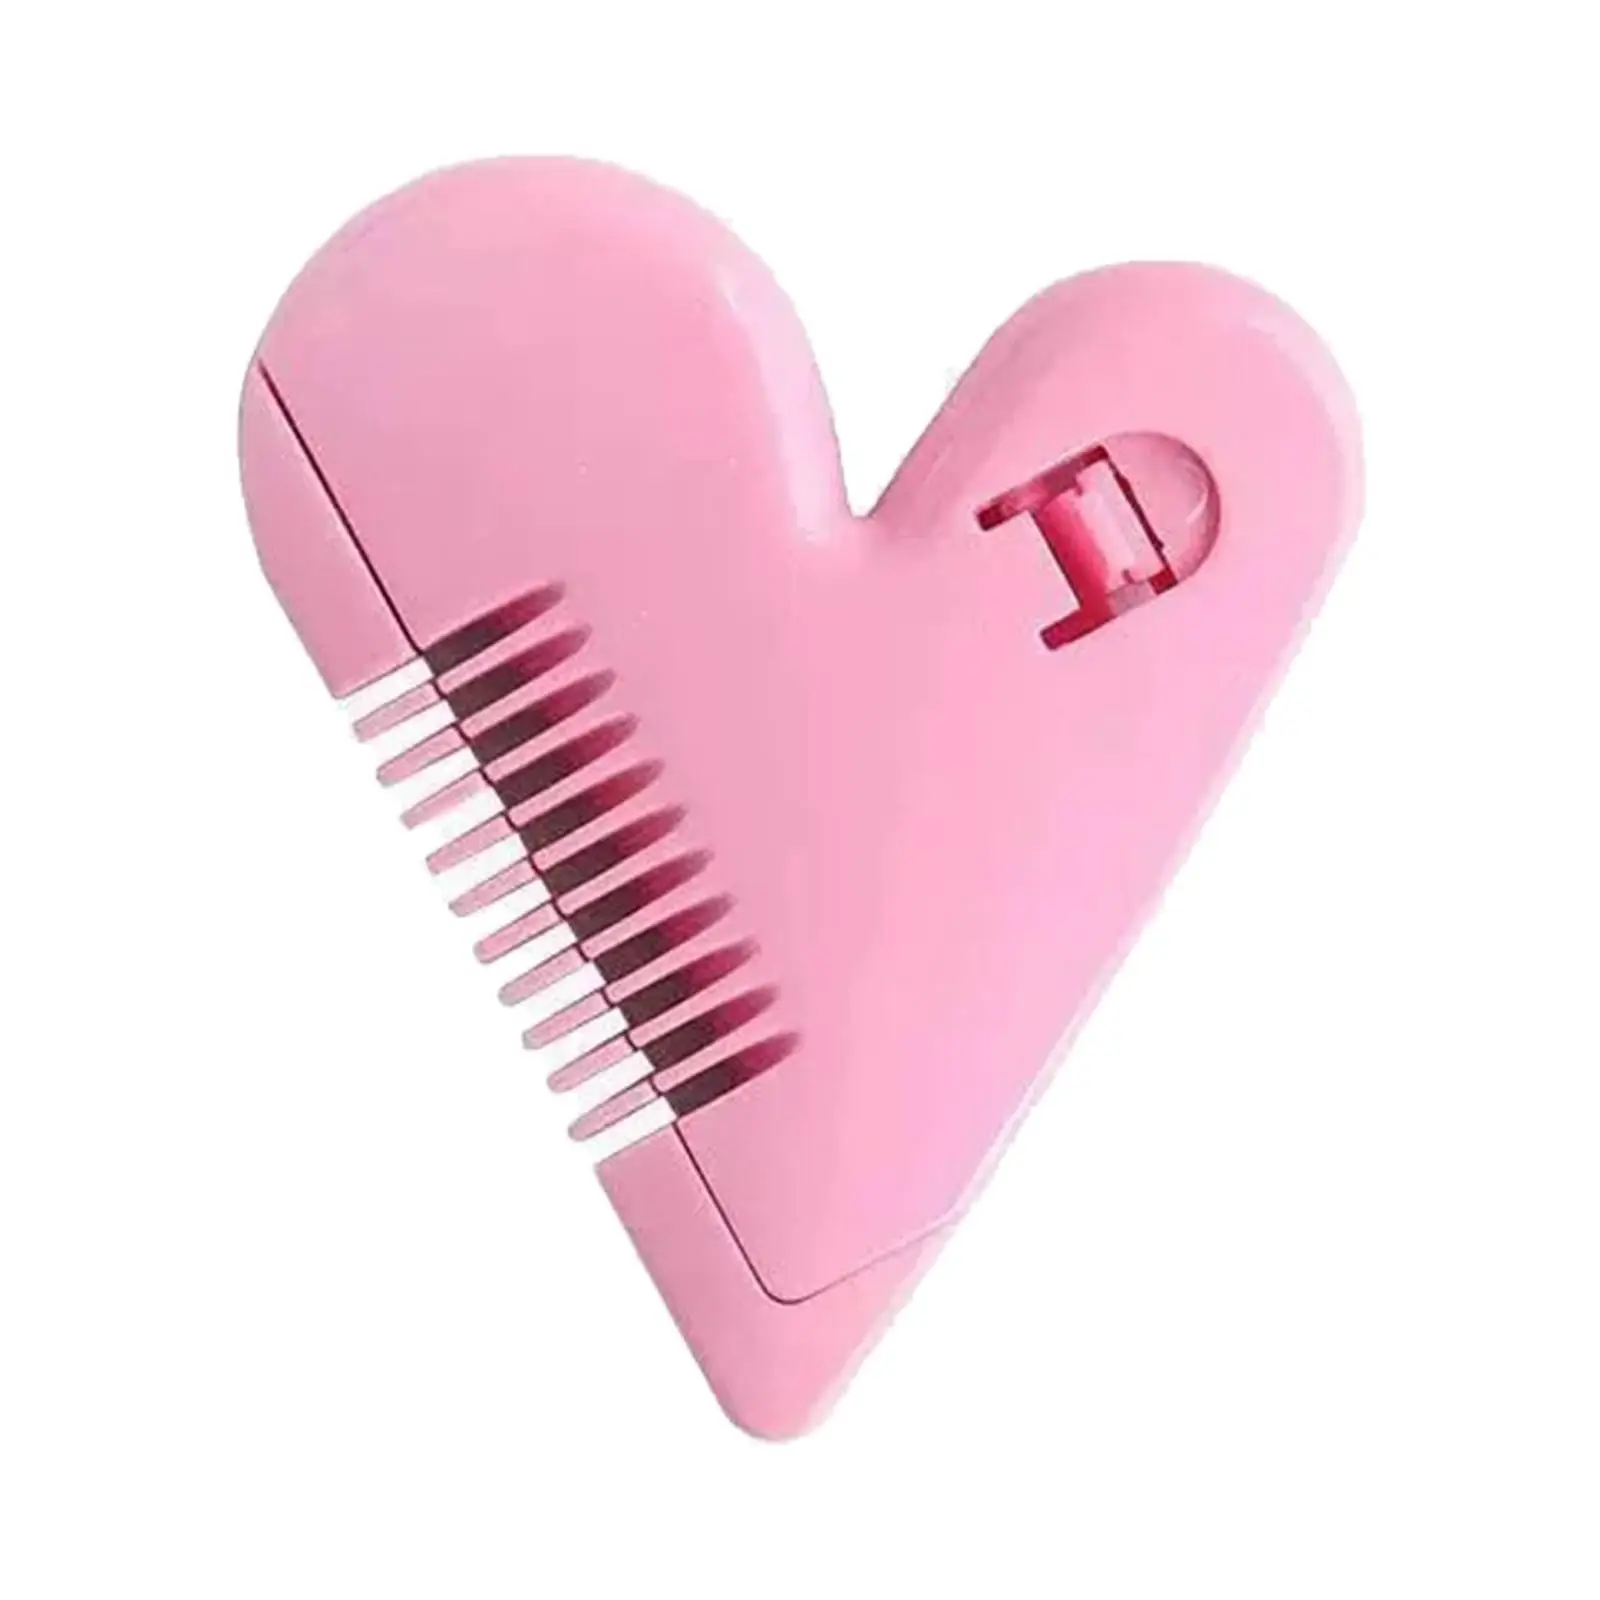 Mini Hair Trimmer Hairdressing Tool Trimming Bangs Hand Tools Hair Cutting Thinning Comb for Home Use Thin and Thick Hair Girls